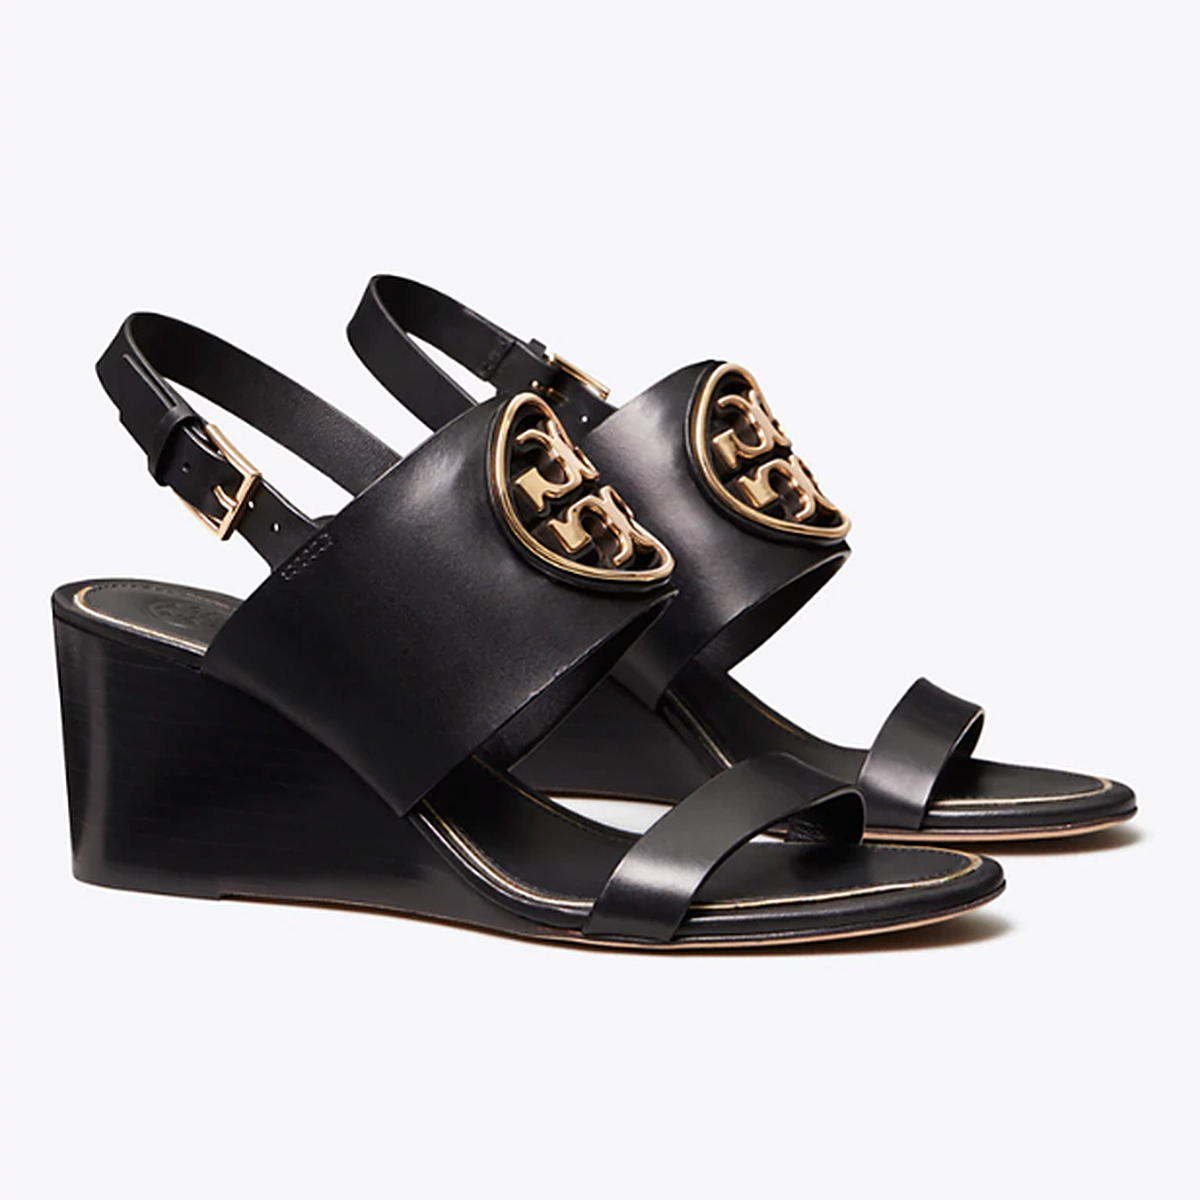 11 Markdowns in the Tory Burch Sale Up 